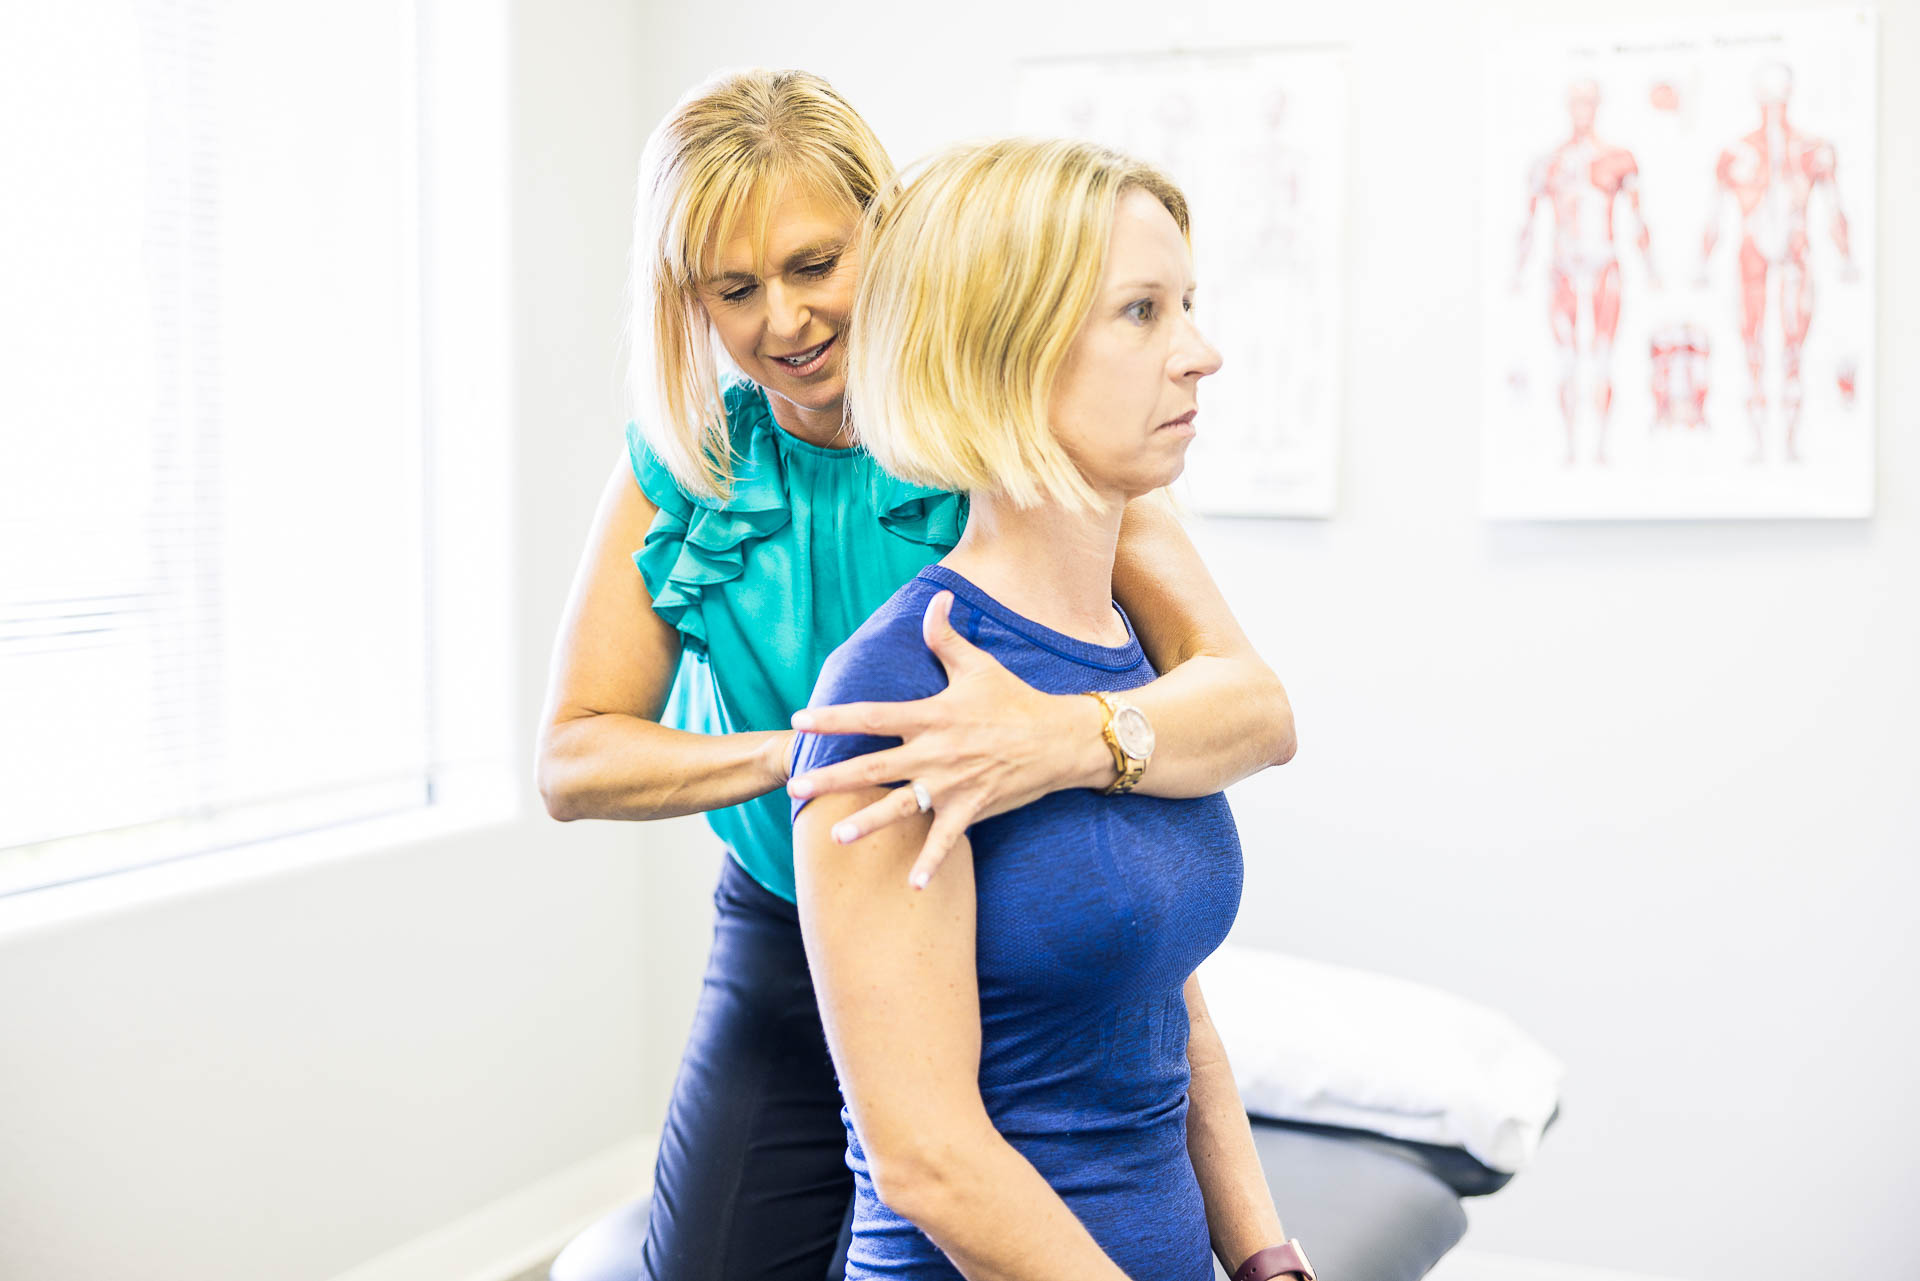 Custom physical therapy treatment plans